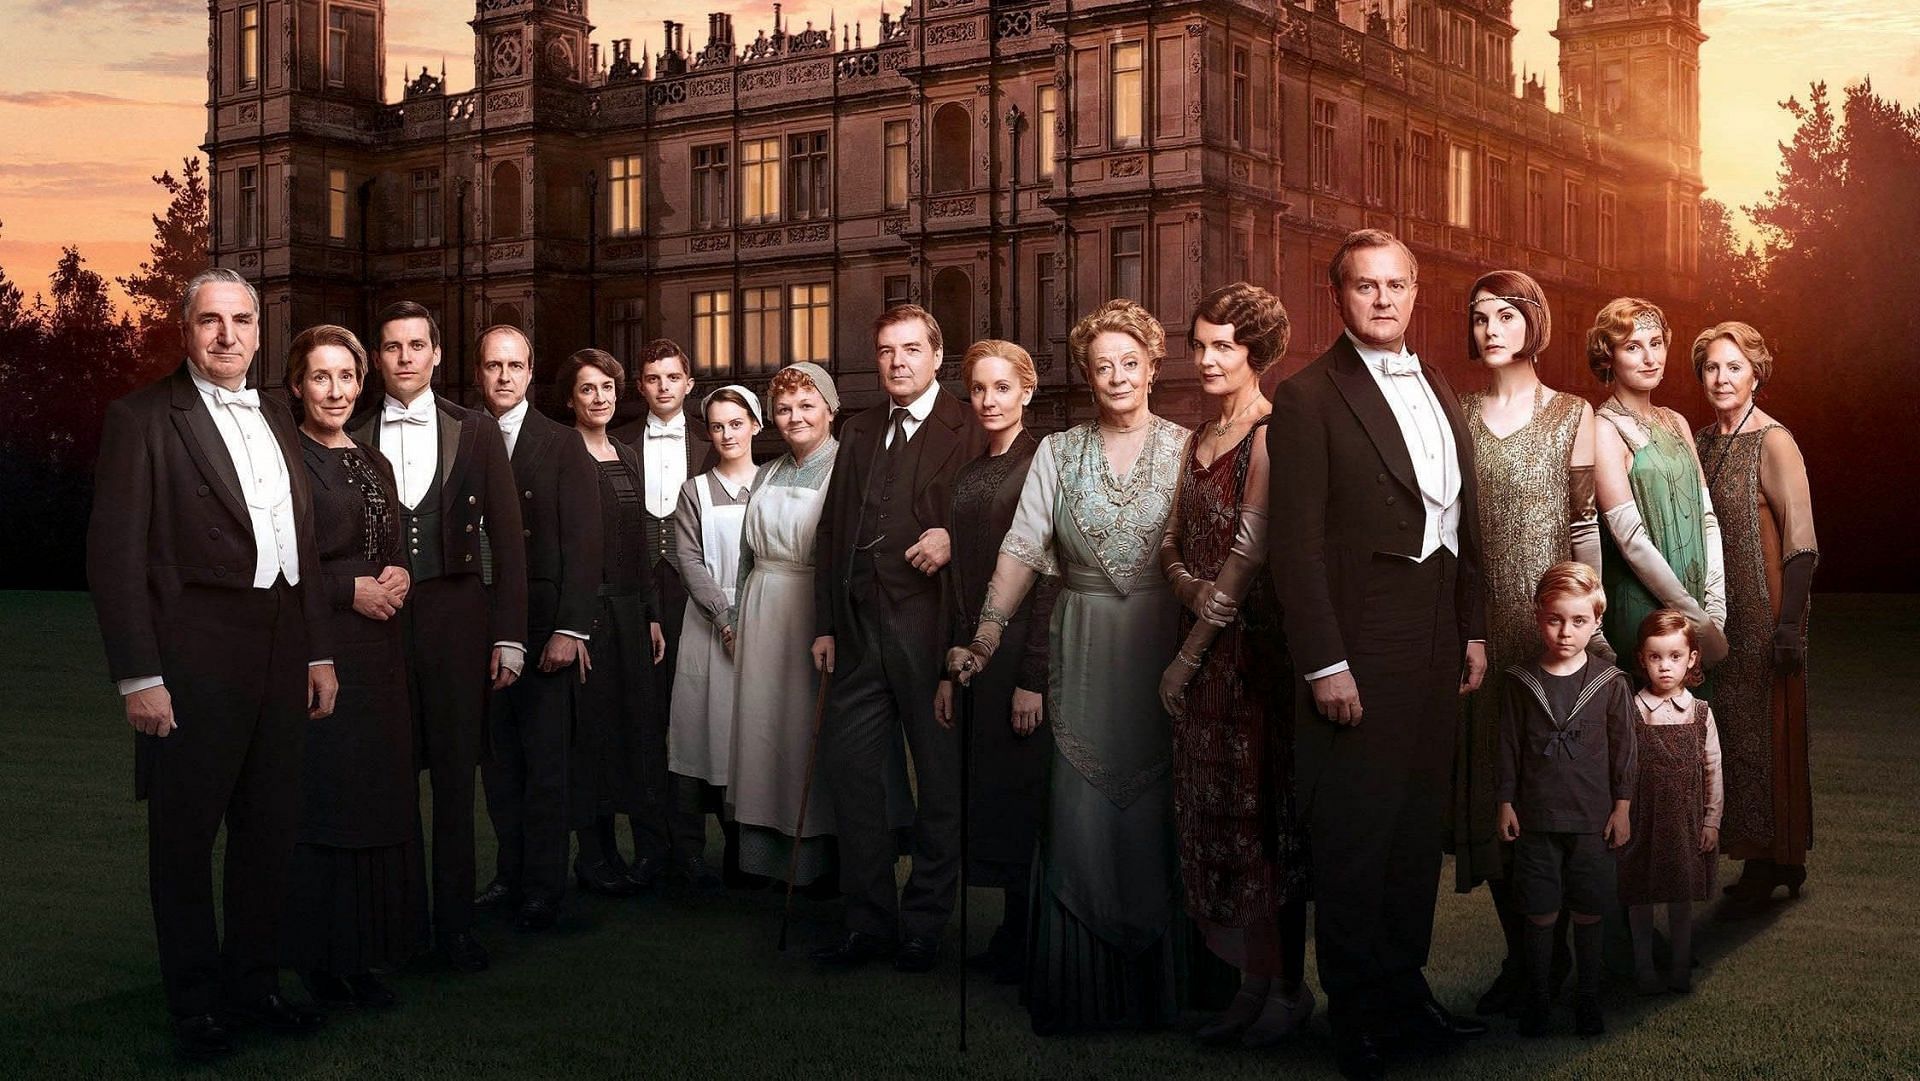 The cast of Downton Abbey (Image via Carnival Films)